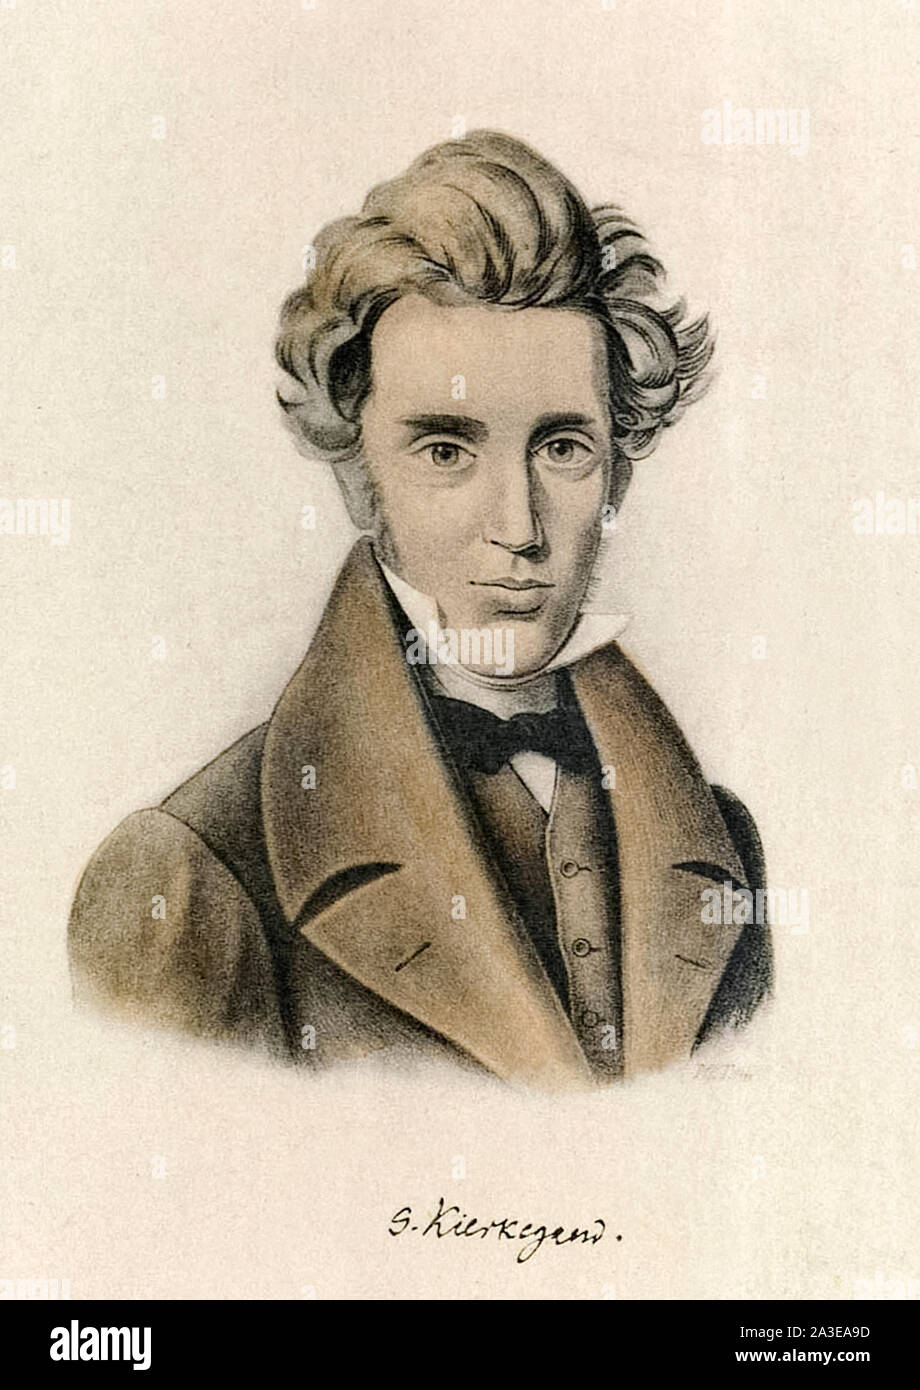 Soren Kierkegaard (1813-1855) influential Danish philosopher and theologian, poet, social critic and religious author.  Photograph of lithograph based on a sketch by Kierkegaard ‘s cousin circa 1840. Stock Photo